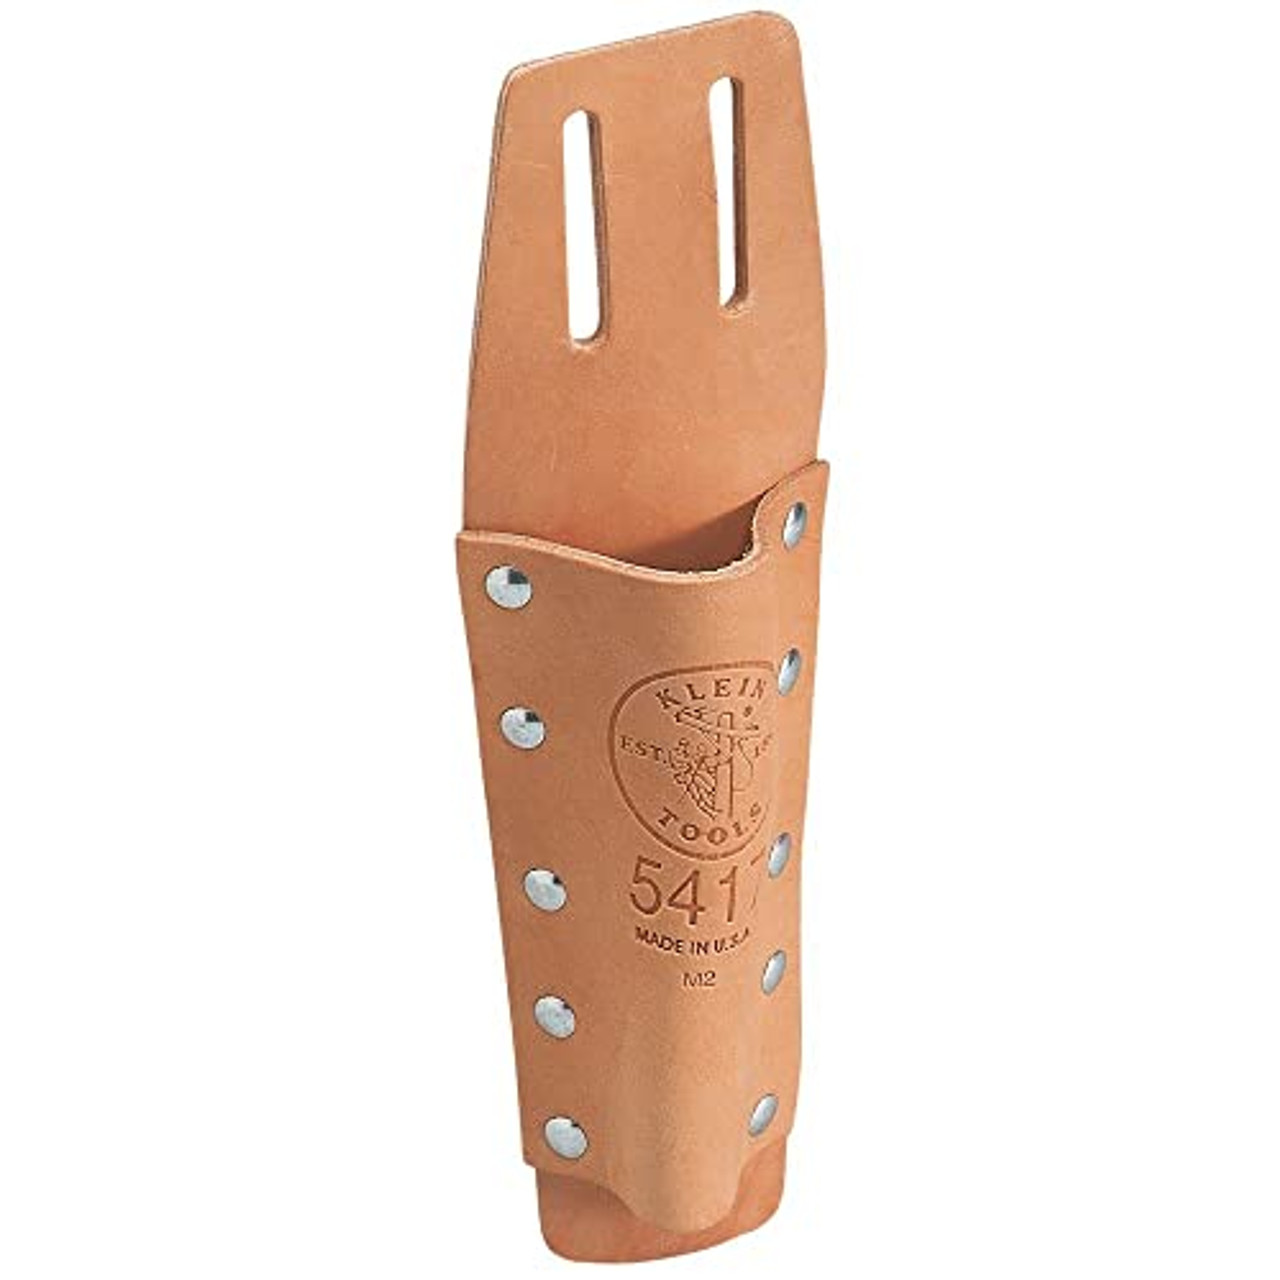 Klein 5417 Bull Pin Holder with Slotted Connection, Leather JB Tools